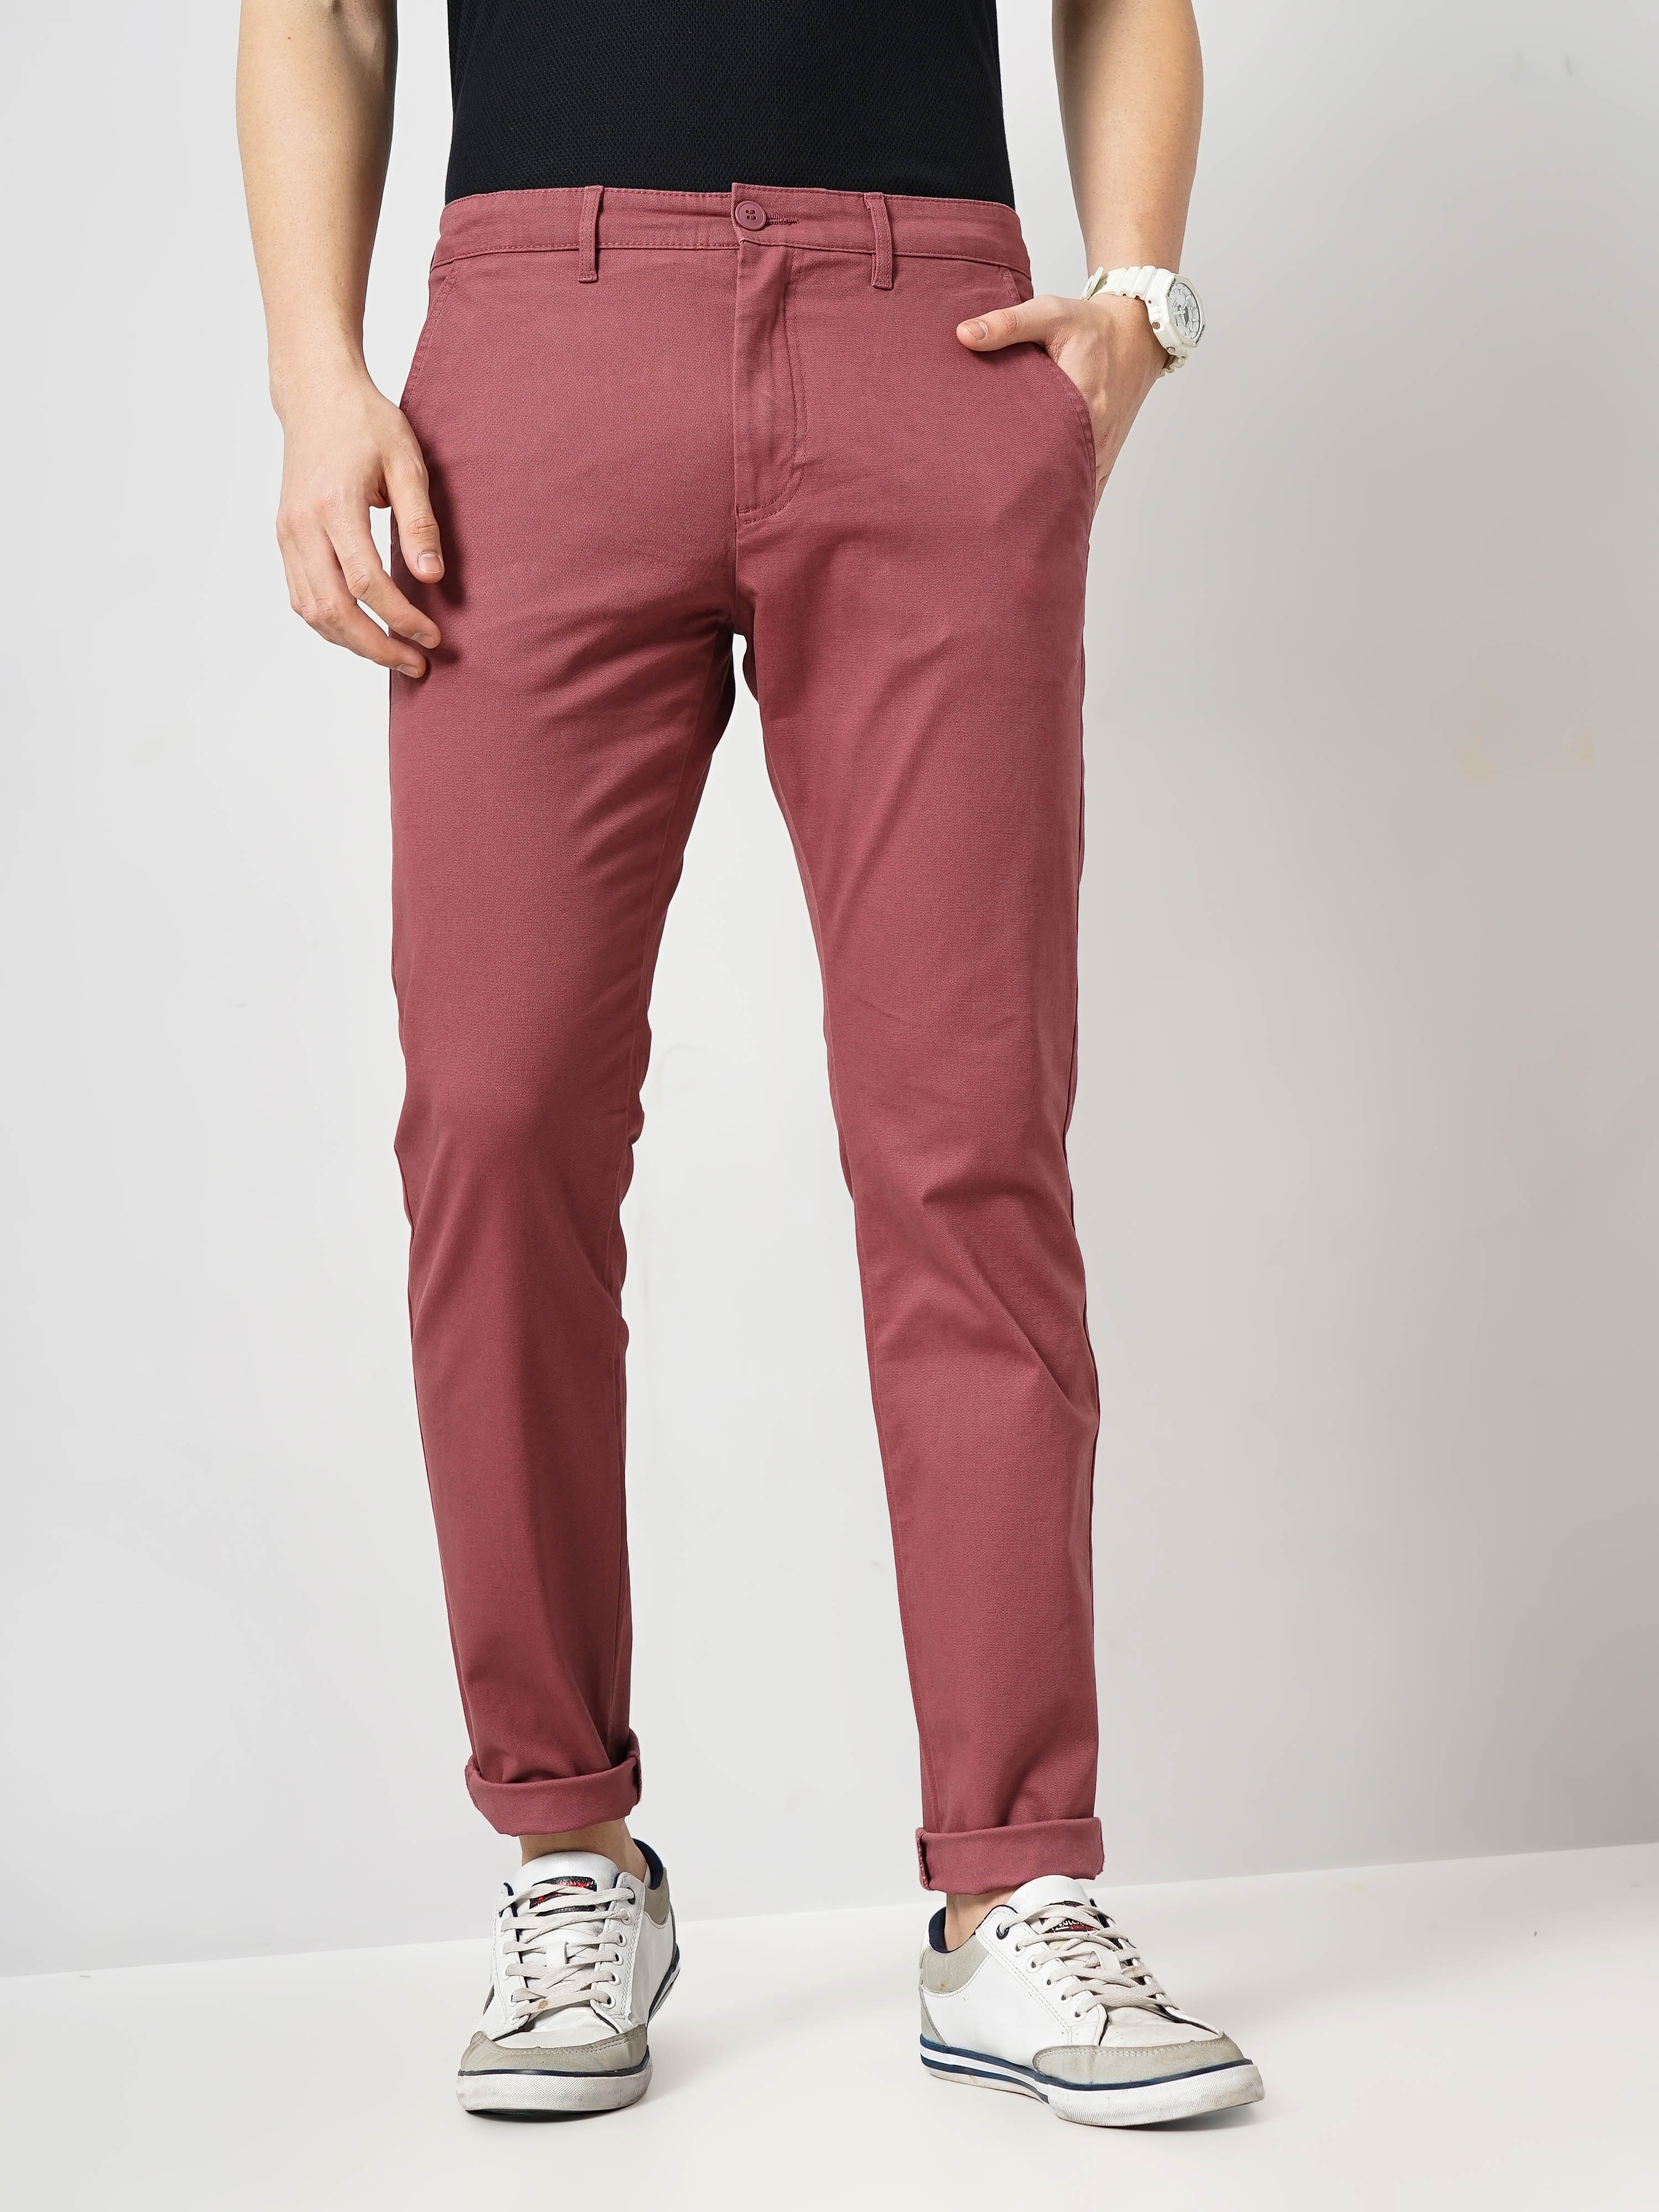 Celio Men Maroon Solid Slim Fit Cotton Basic Chinos Casual Trousers